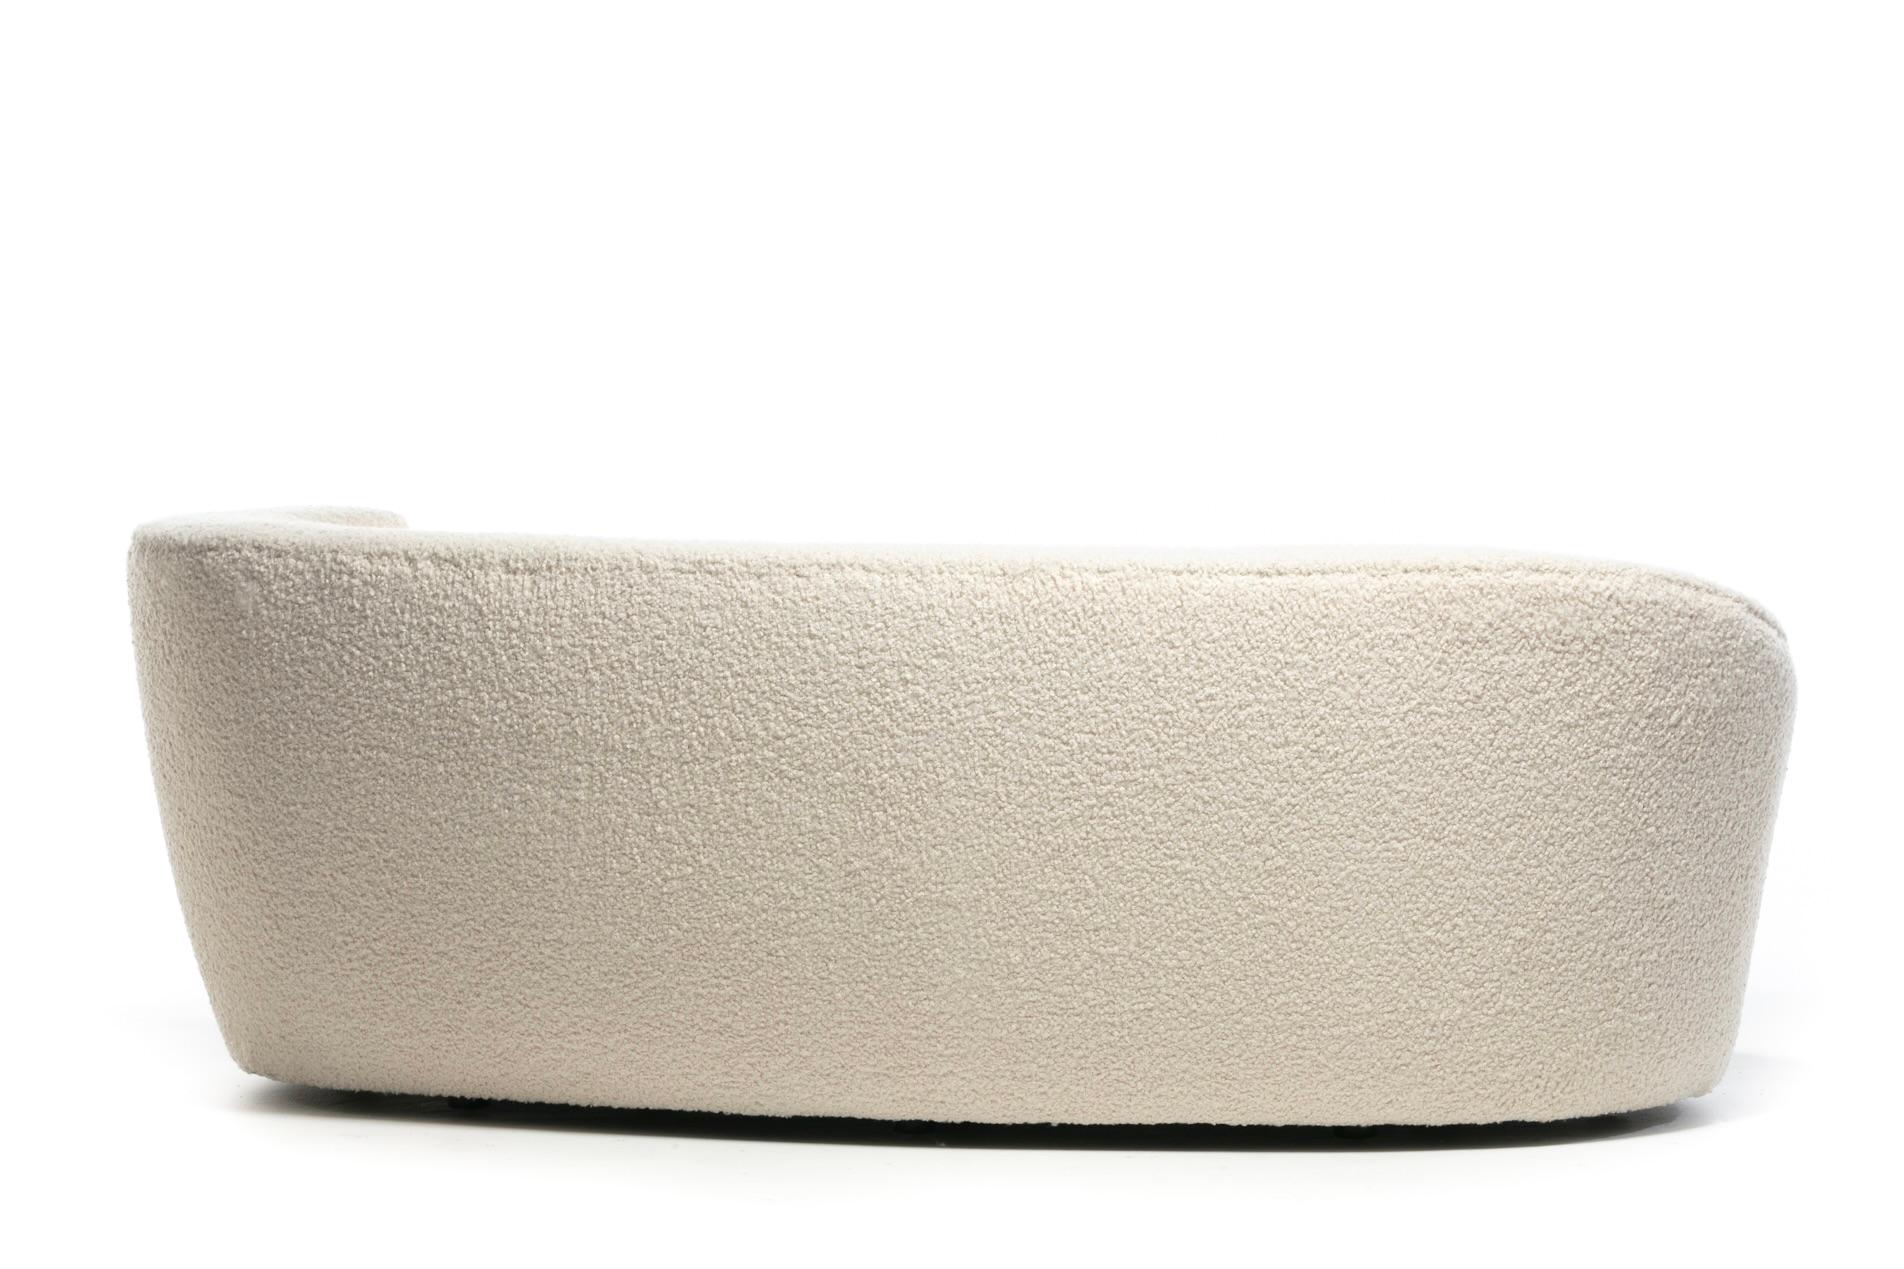 Vladimir Kagan Nautilus Sofa in Ivory White Bouclé by Directional, c. 1990 For Sale 4